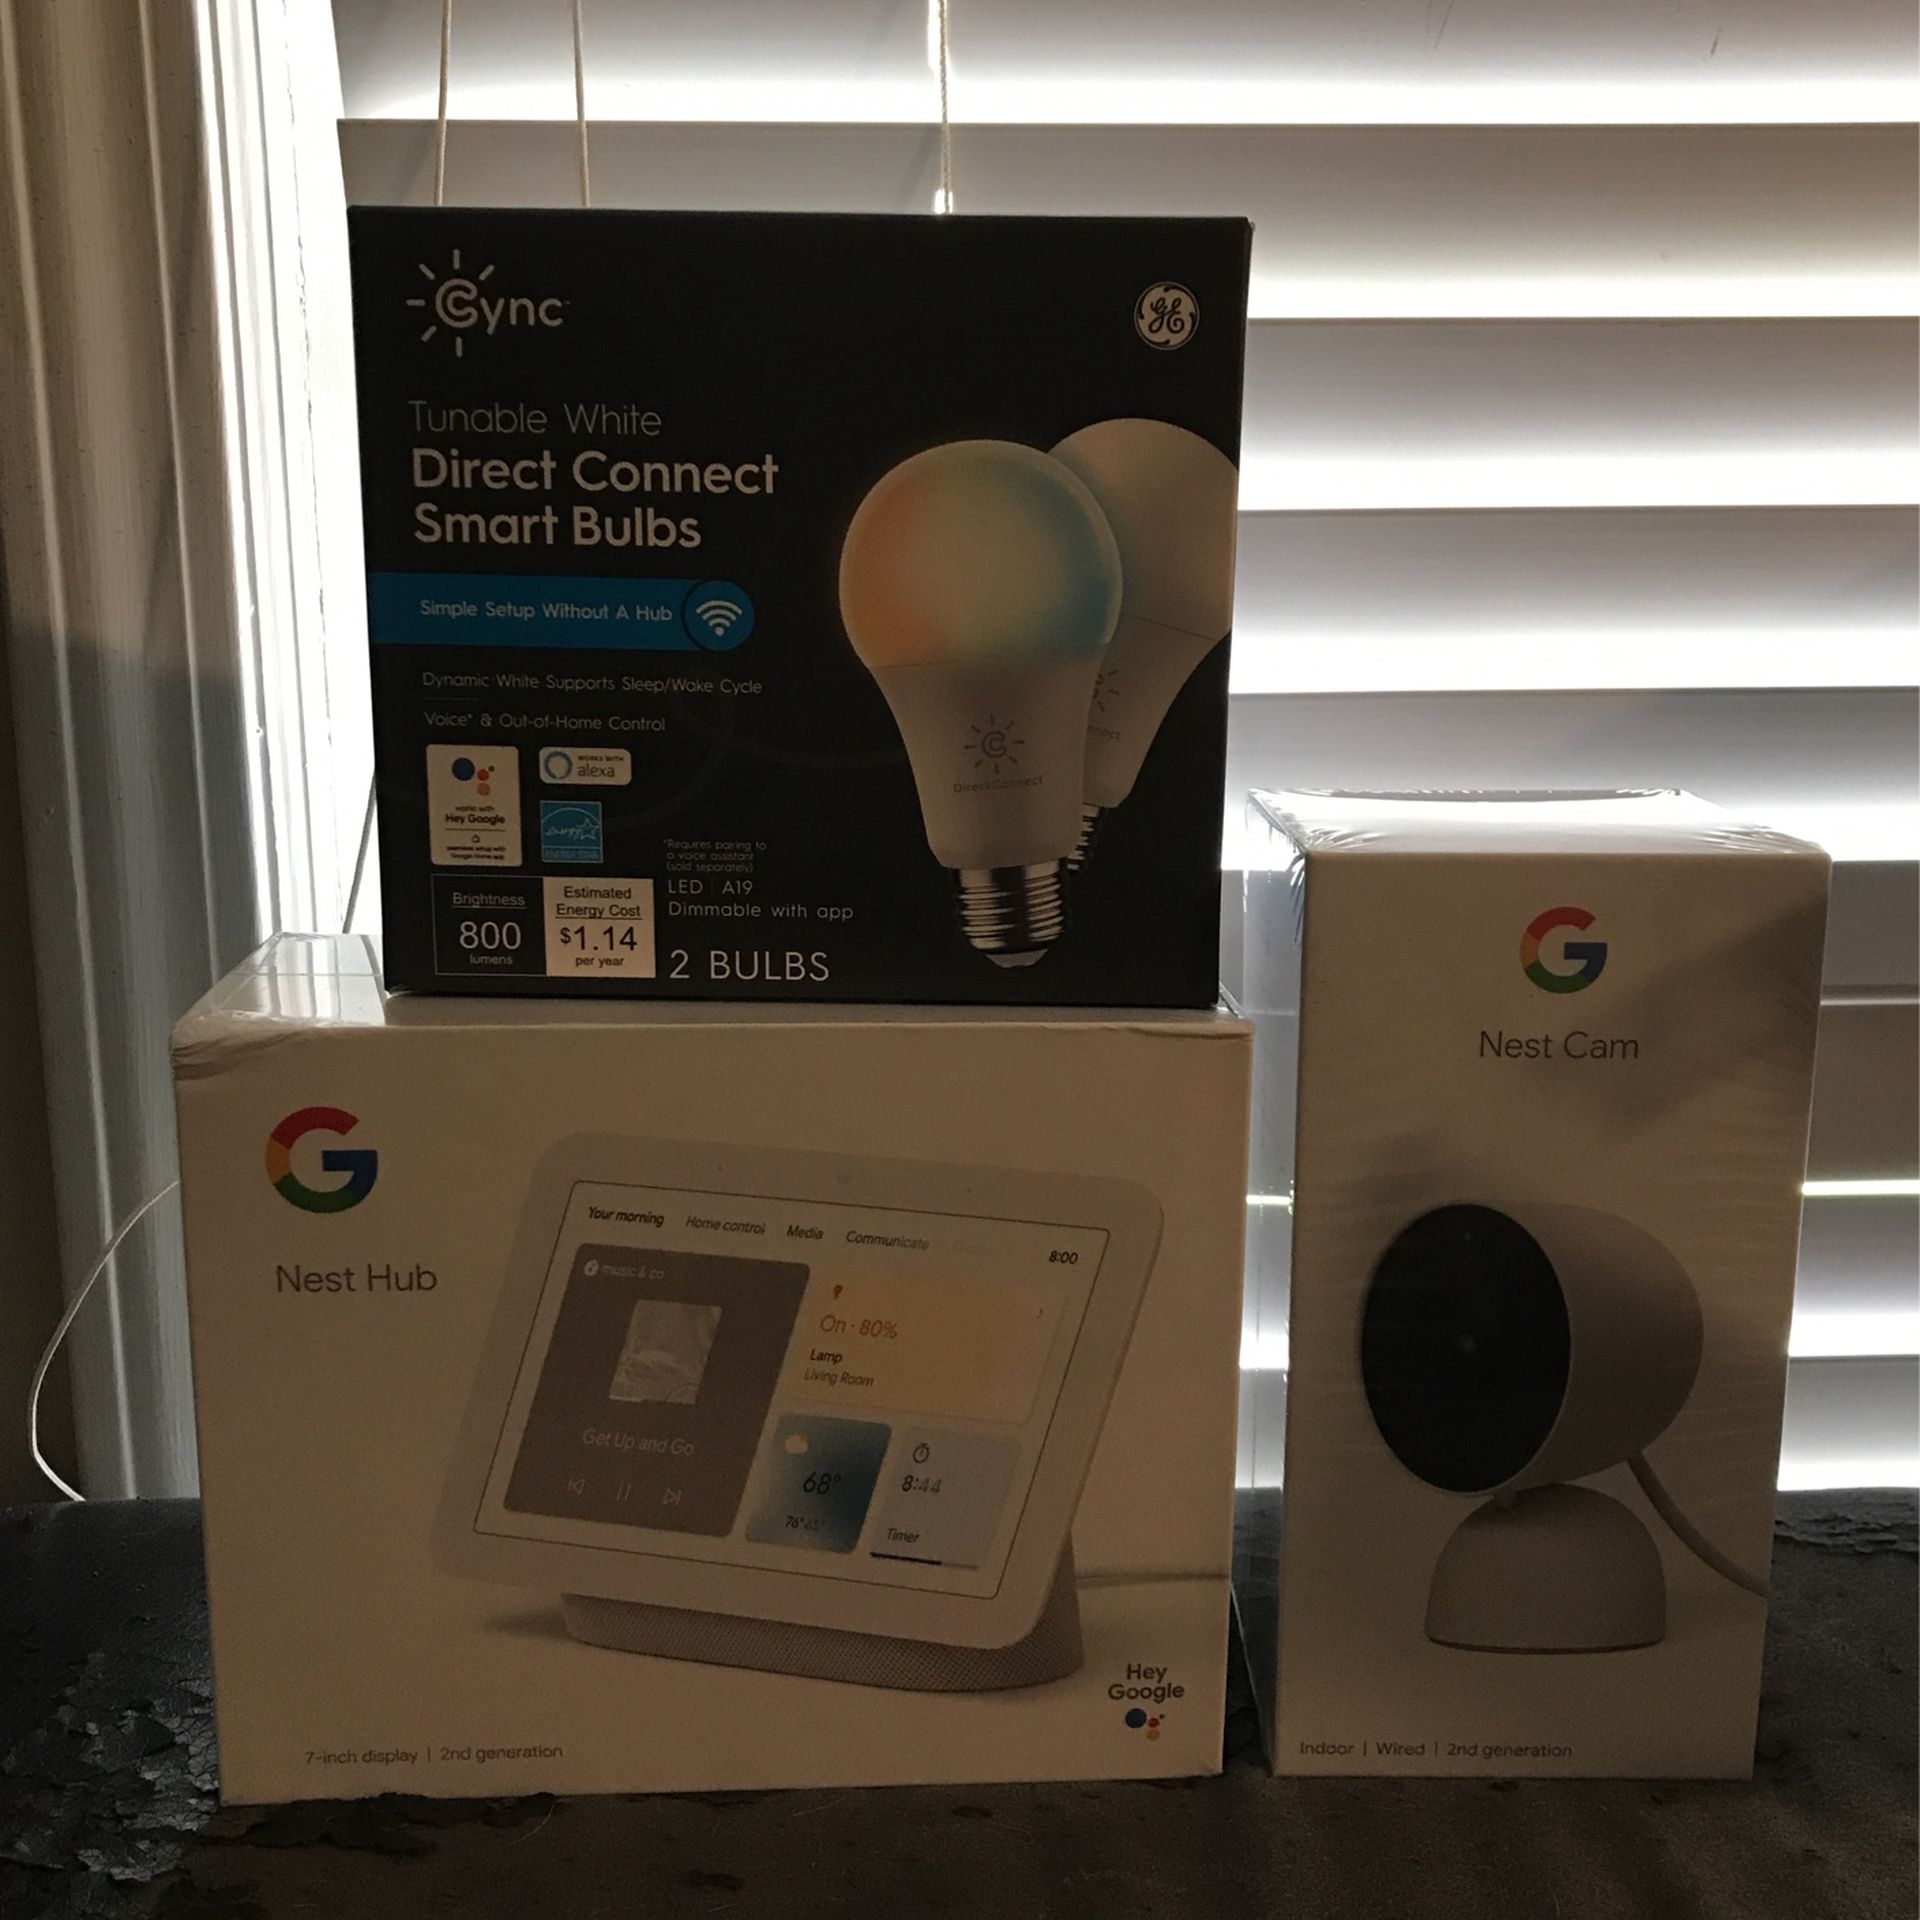 Google Nest Hub With Cam And Tunable White Direct Connect Smart Bulbs